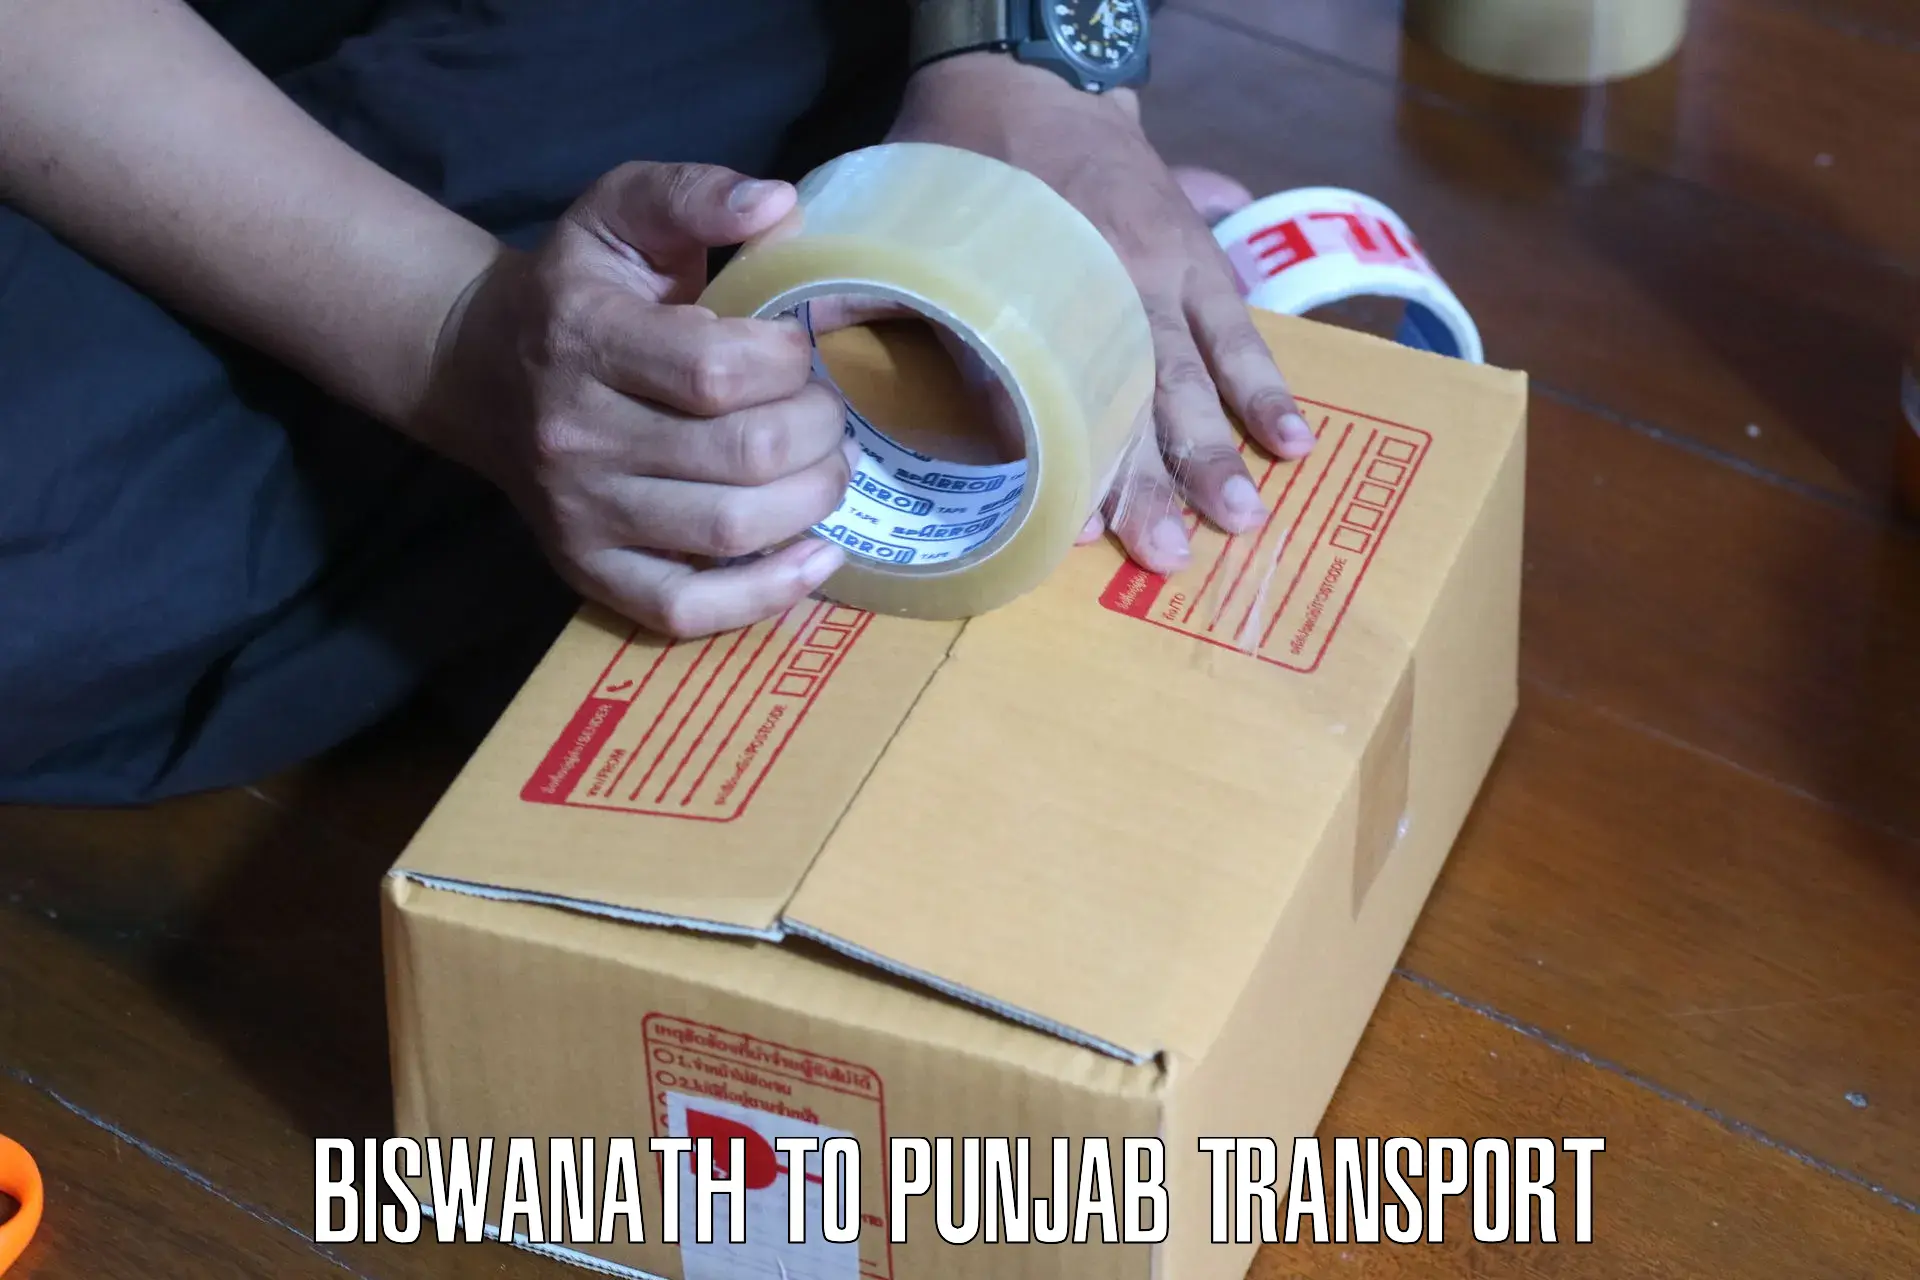 Pick up transport service in Biswanath to Patiala